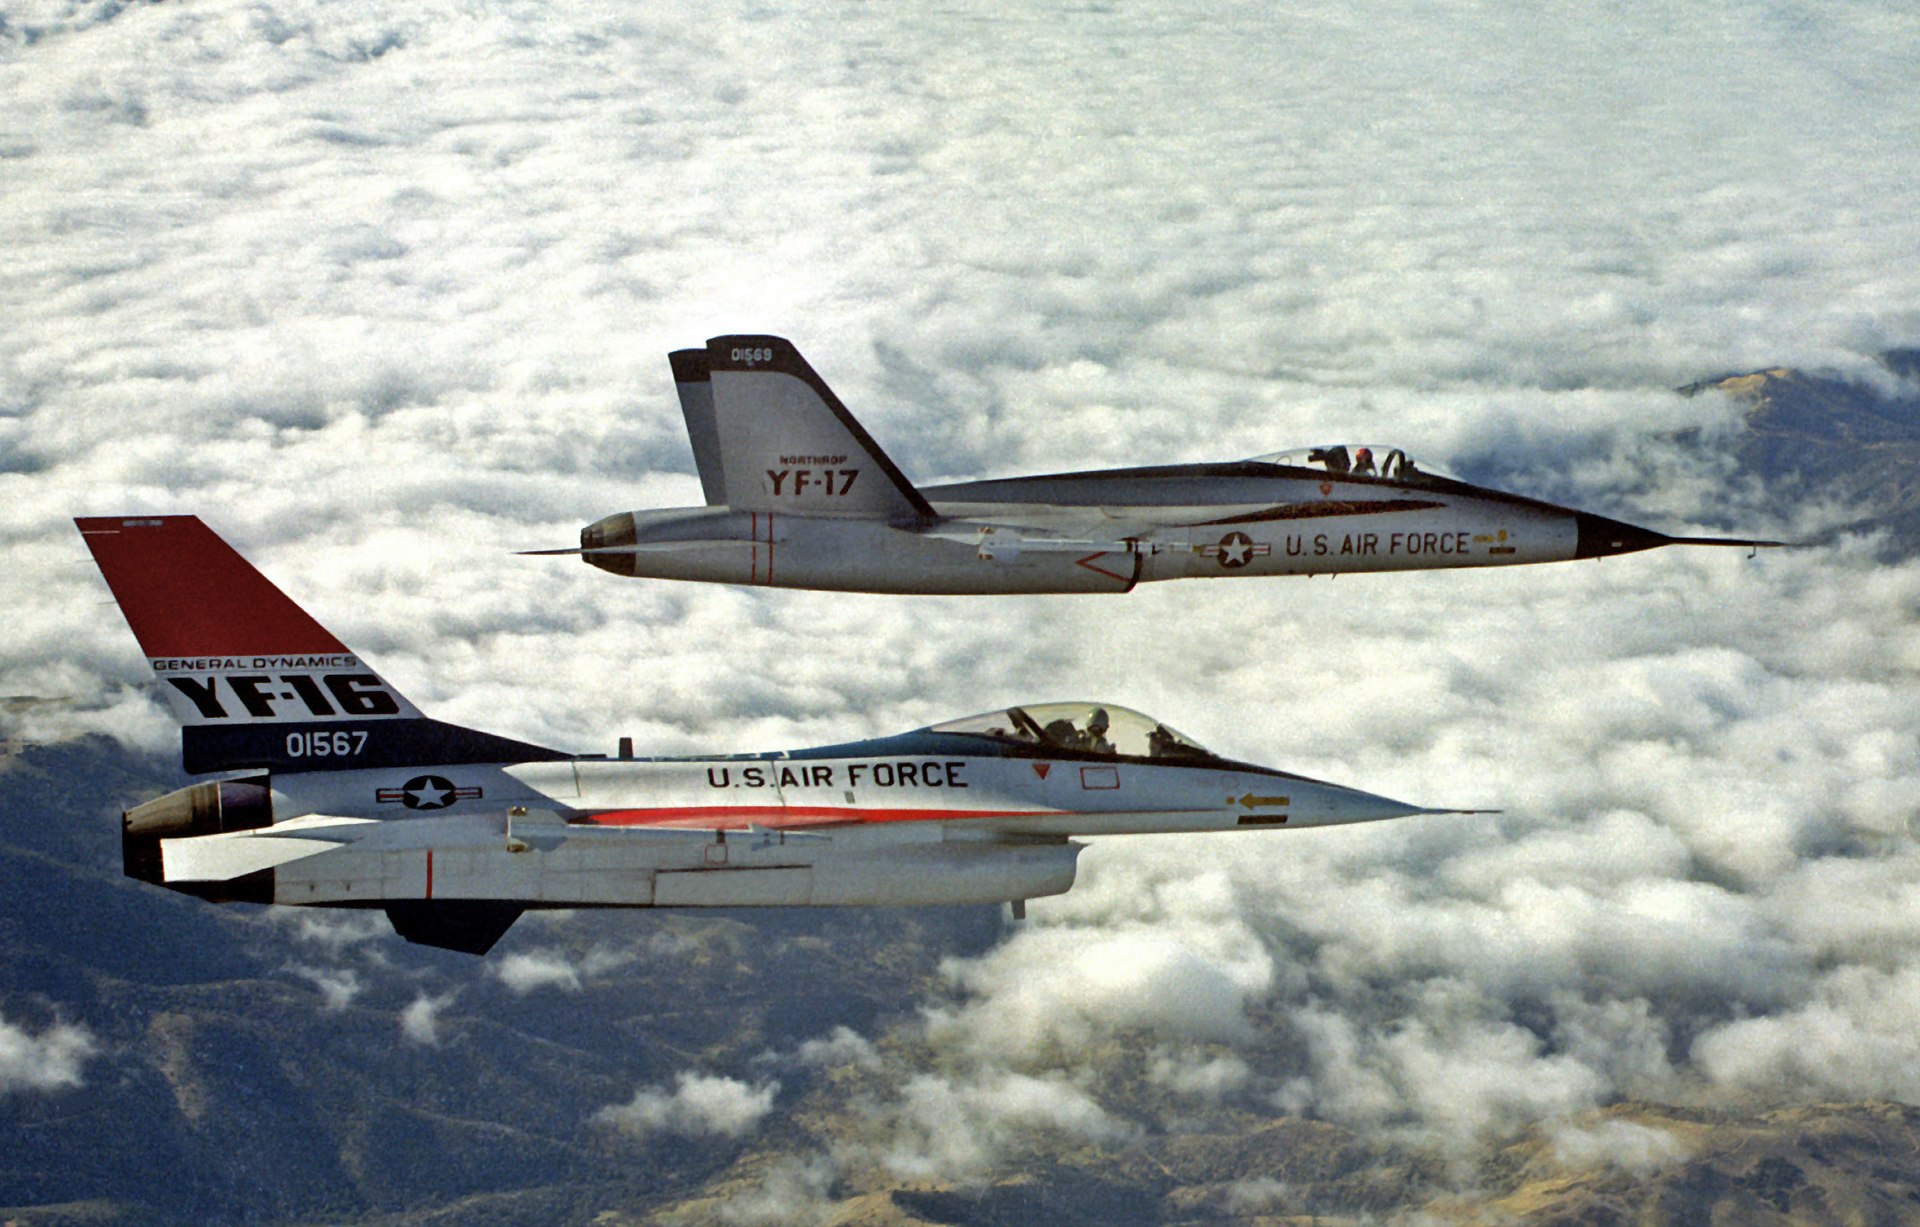 US Air Force - http://www.dodmedia.osd.mil/Assets/1982/Air_Force/DF-SC-82-06297.JPEG, public domain, https://commons.wikimedia.org/w/index.php?curid=4683275